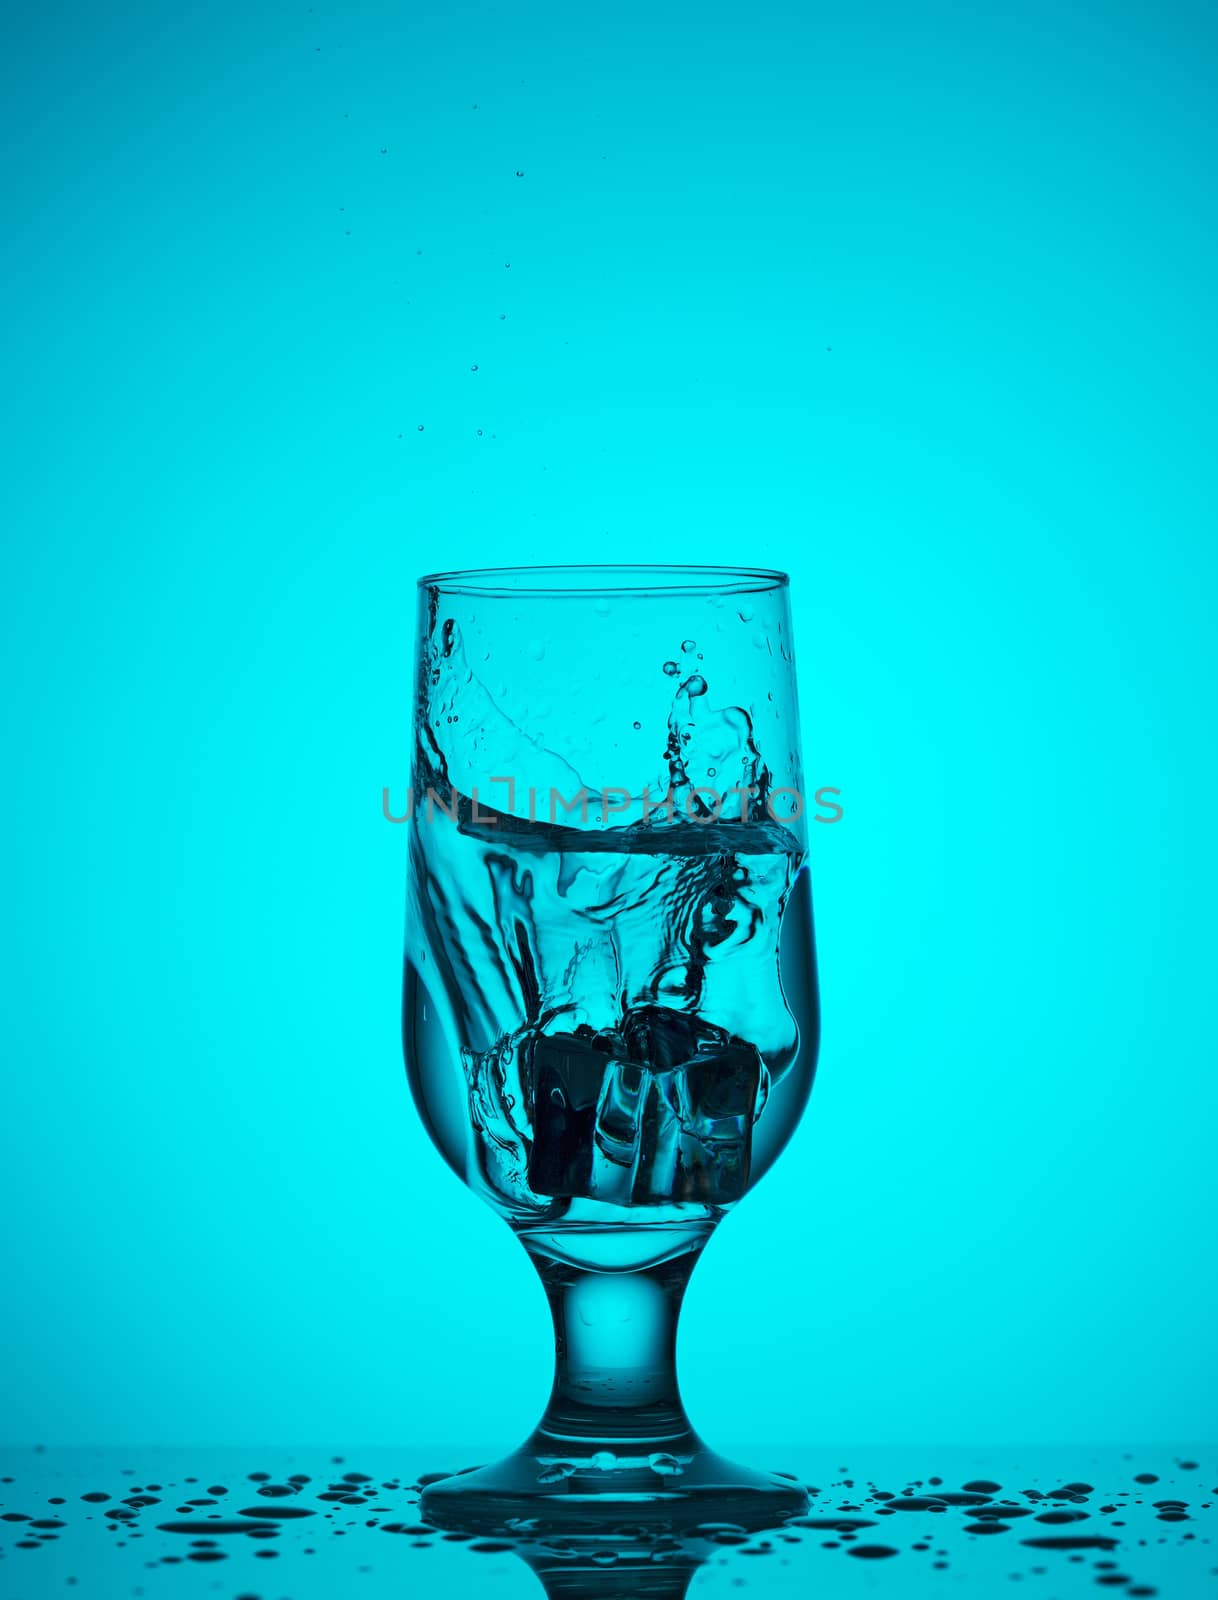 Splash of water from a falling ice cube into a transparent glass glass on a turquoise background color